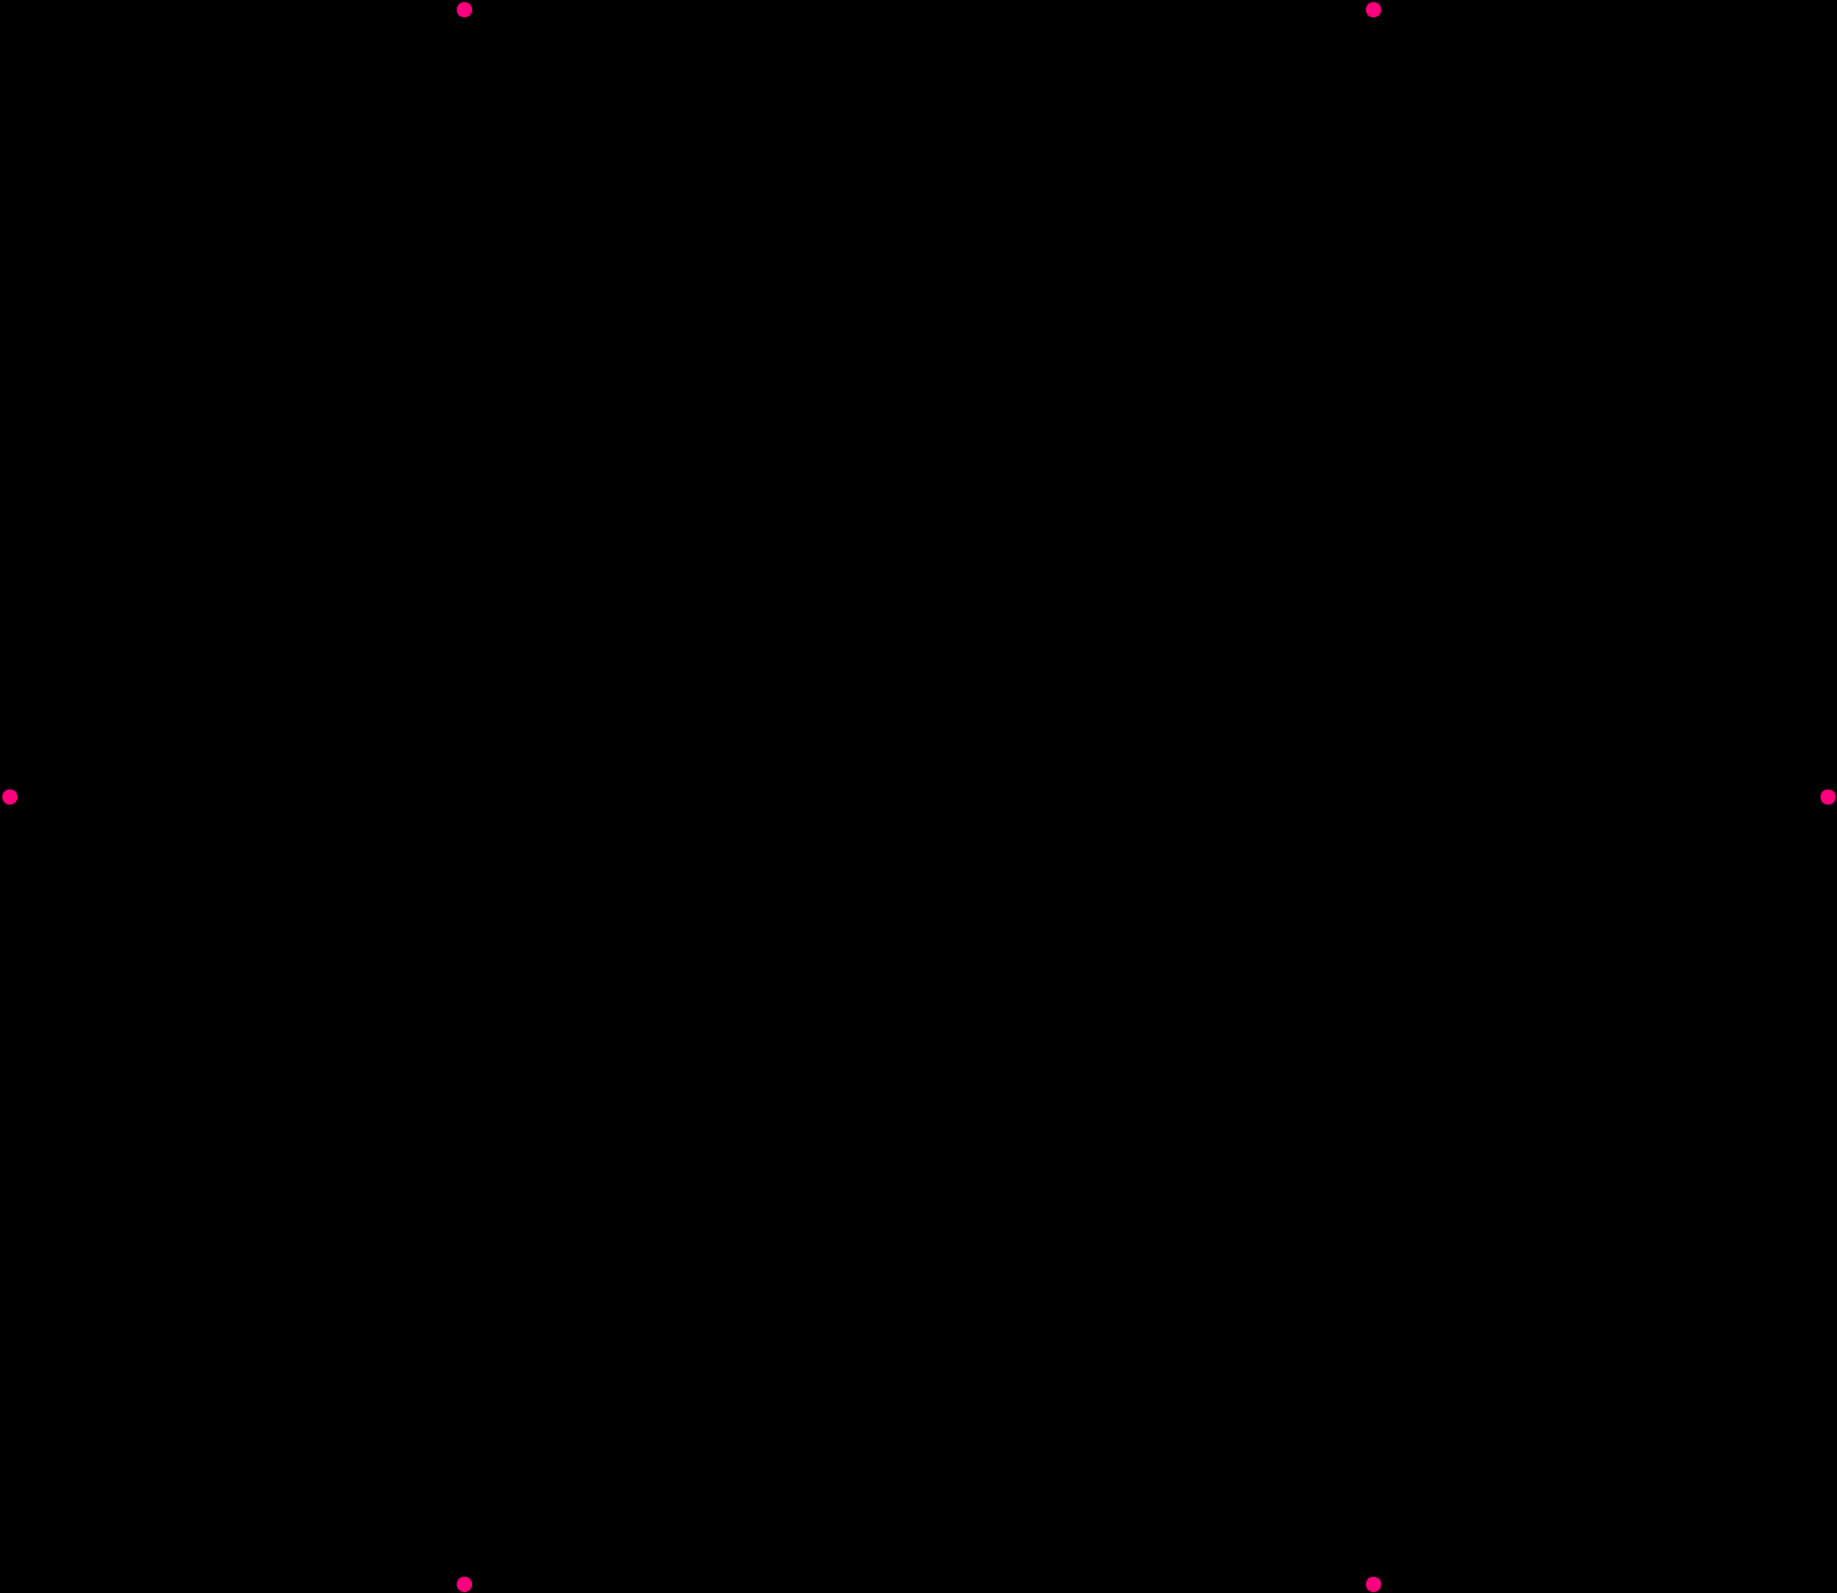 A Black Background With Pink Dots